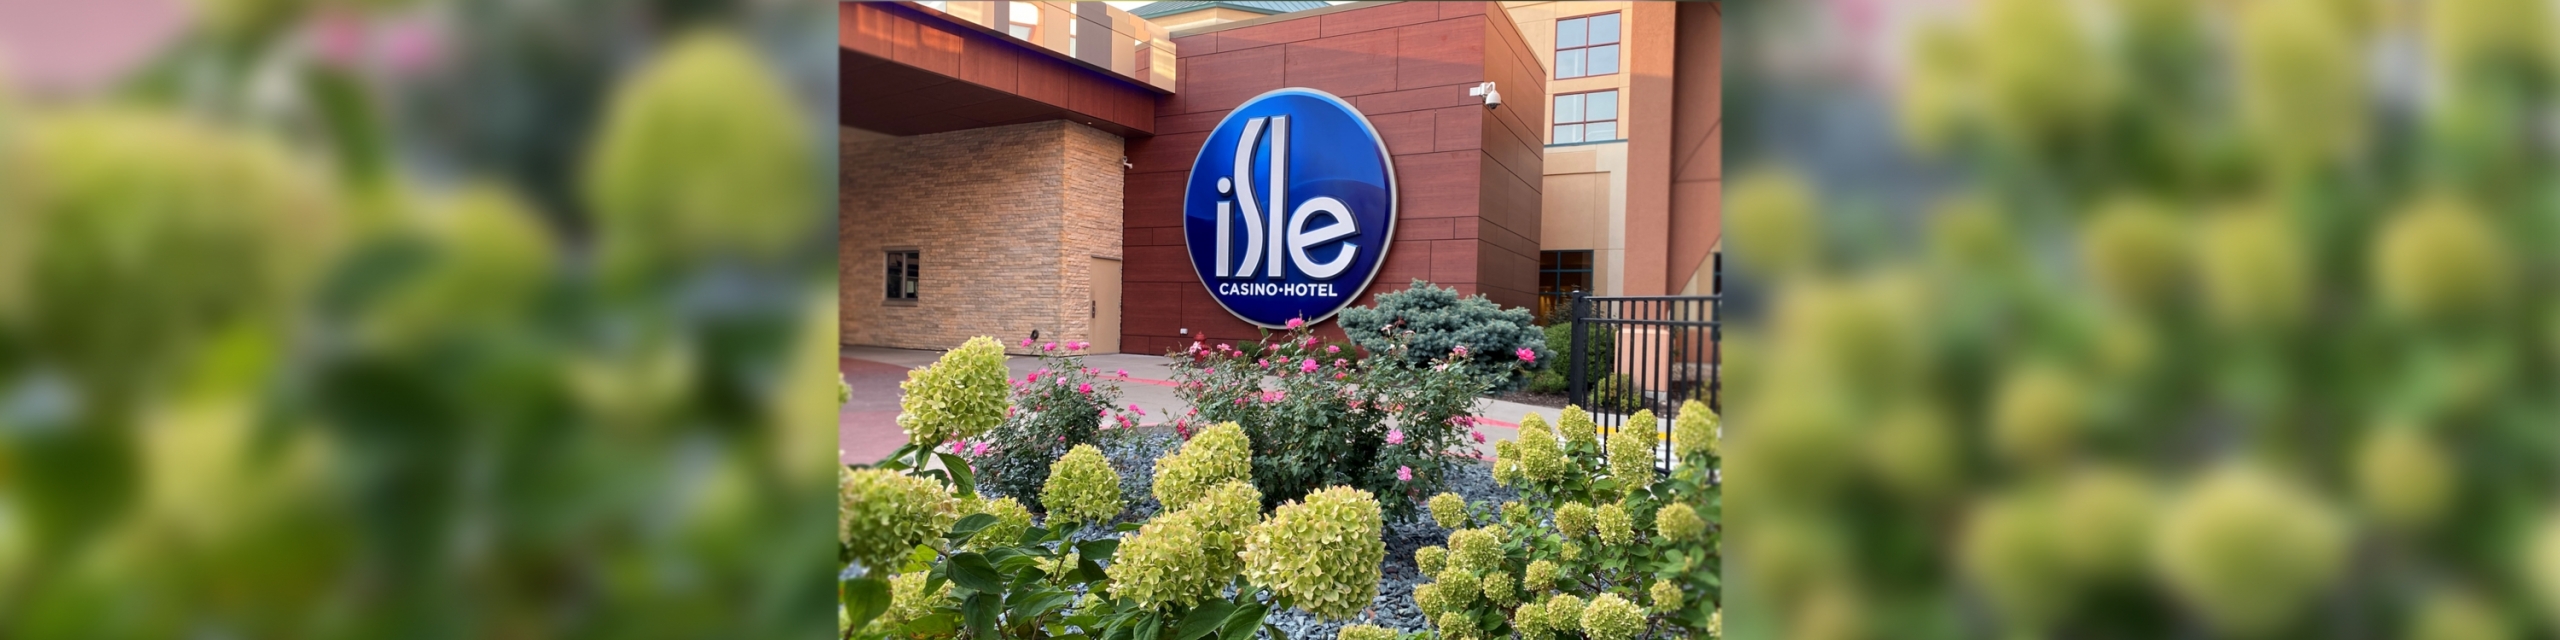 Isle Casino landscaping, with bushes in light and dark green, purple and pink flowers, and the Isle sign hangs on the brick wall in the background.